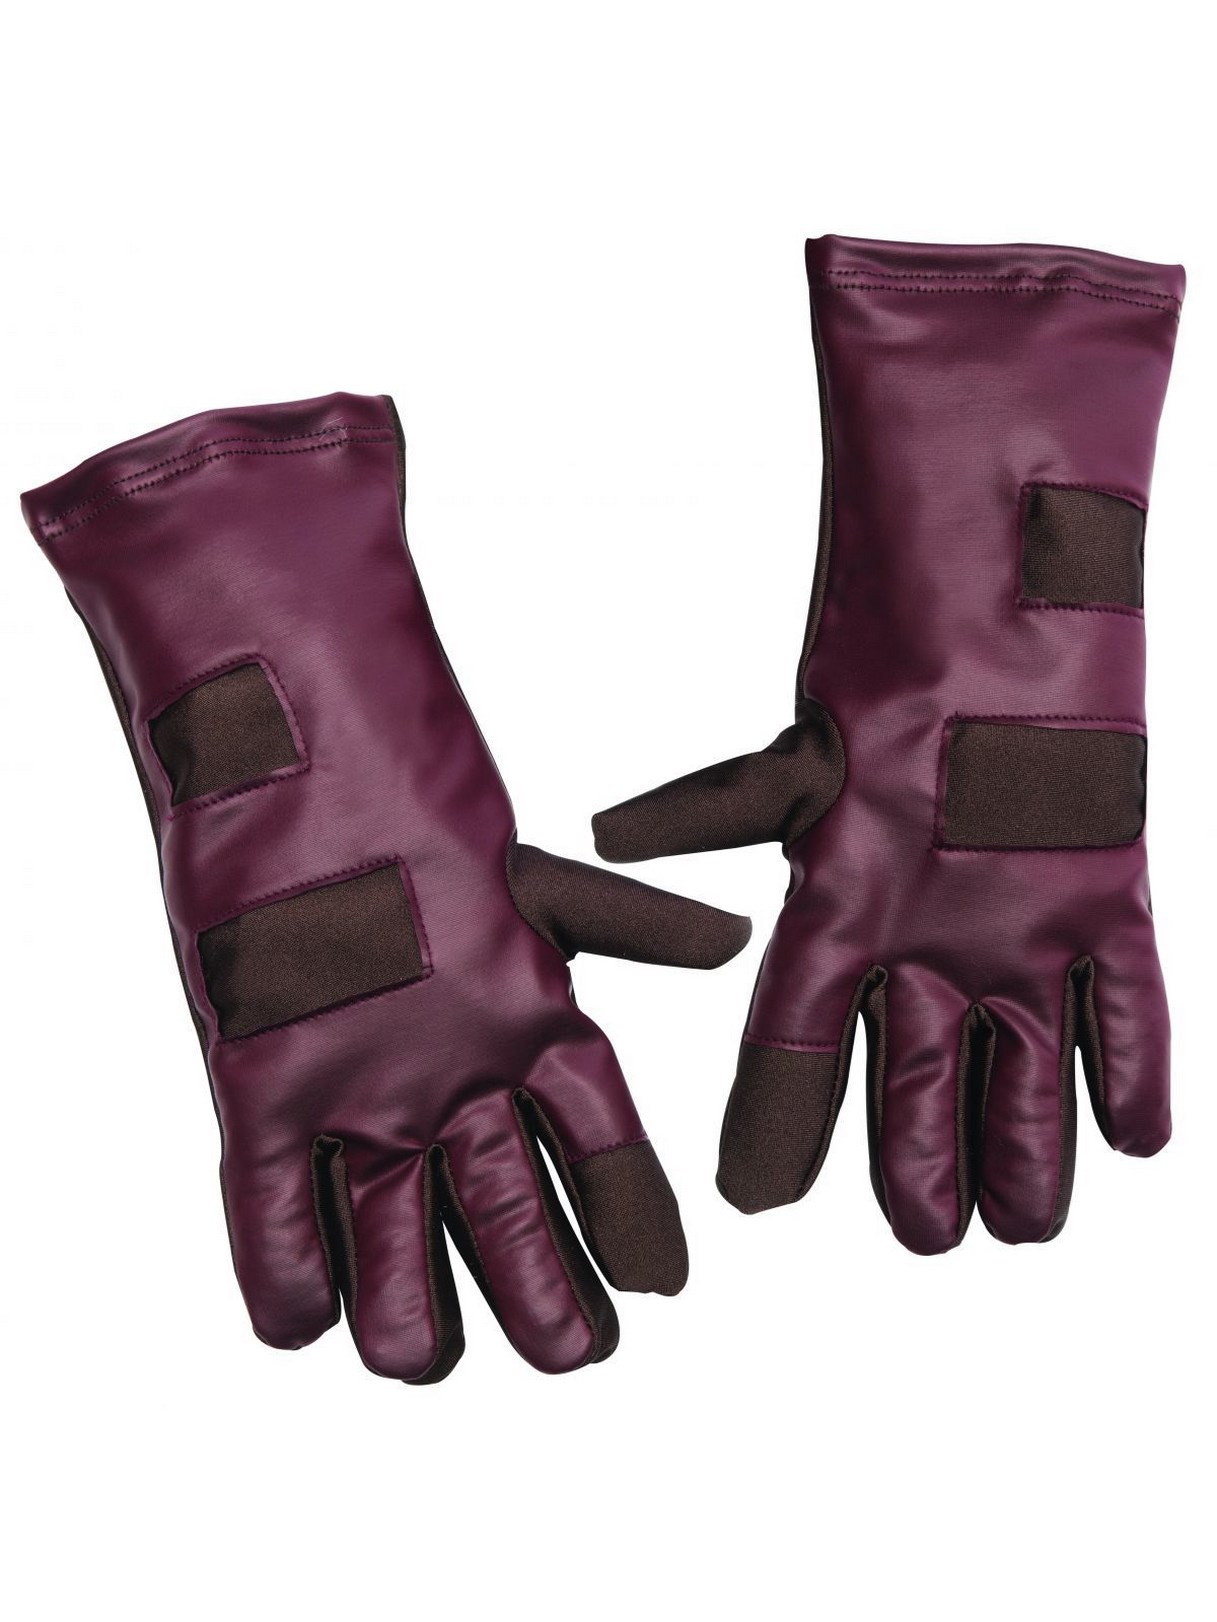 Guardians of the Galaxy - Kids Star-Lord Gloves